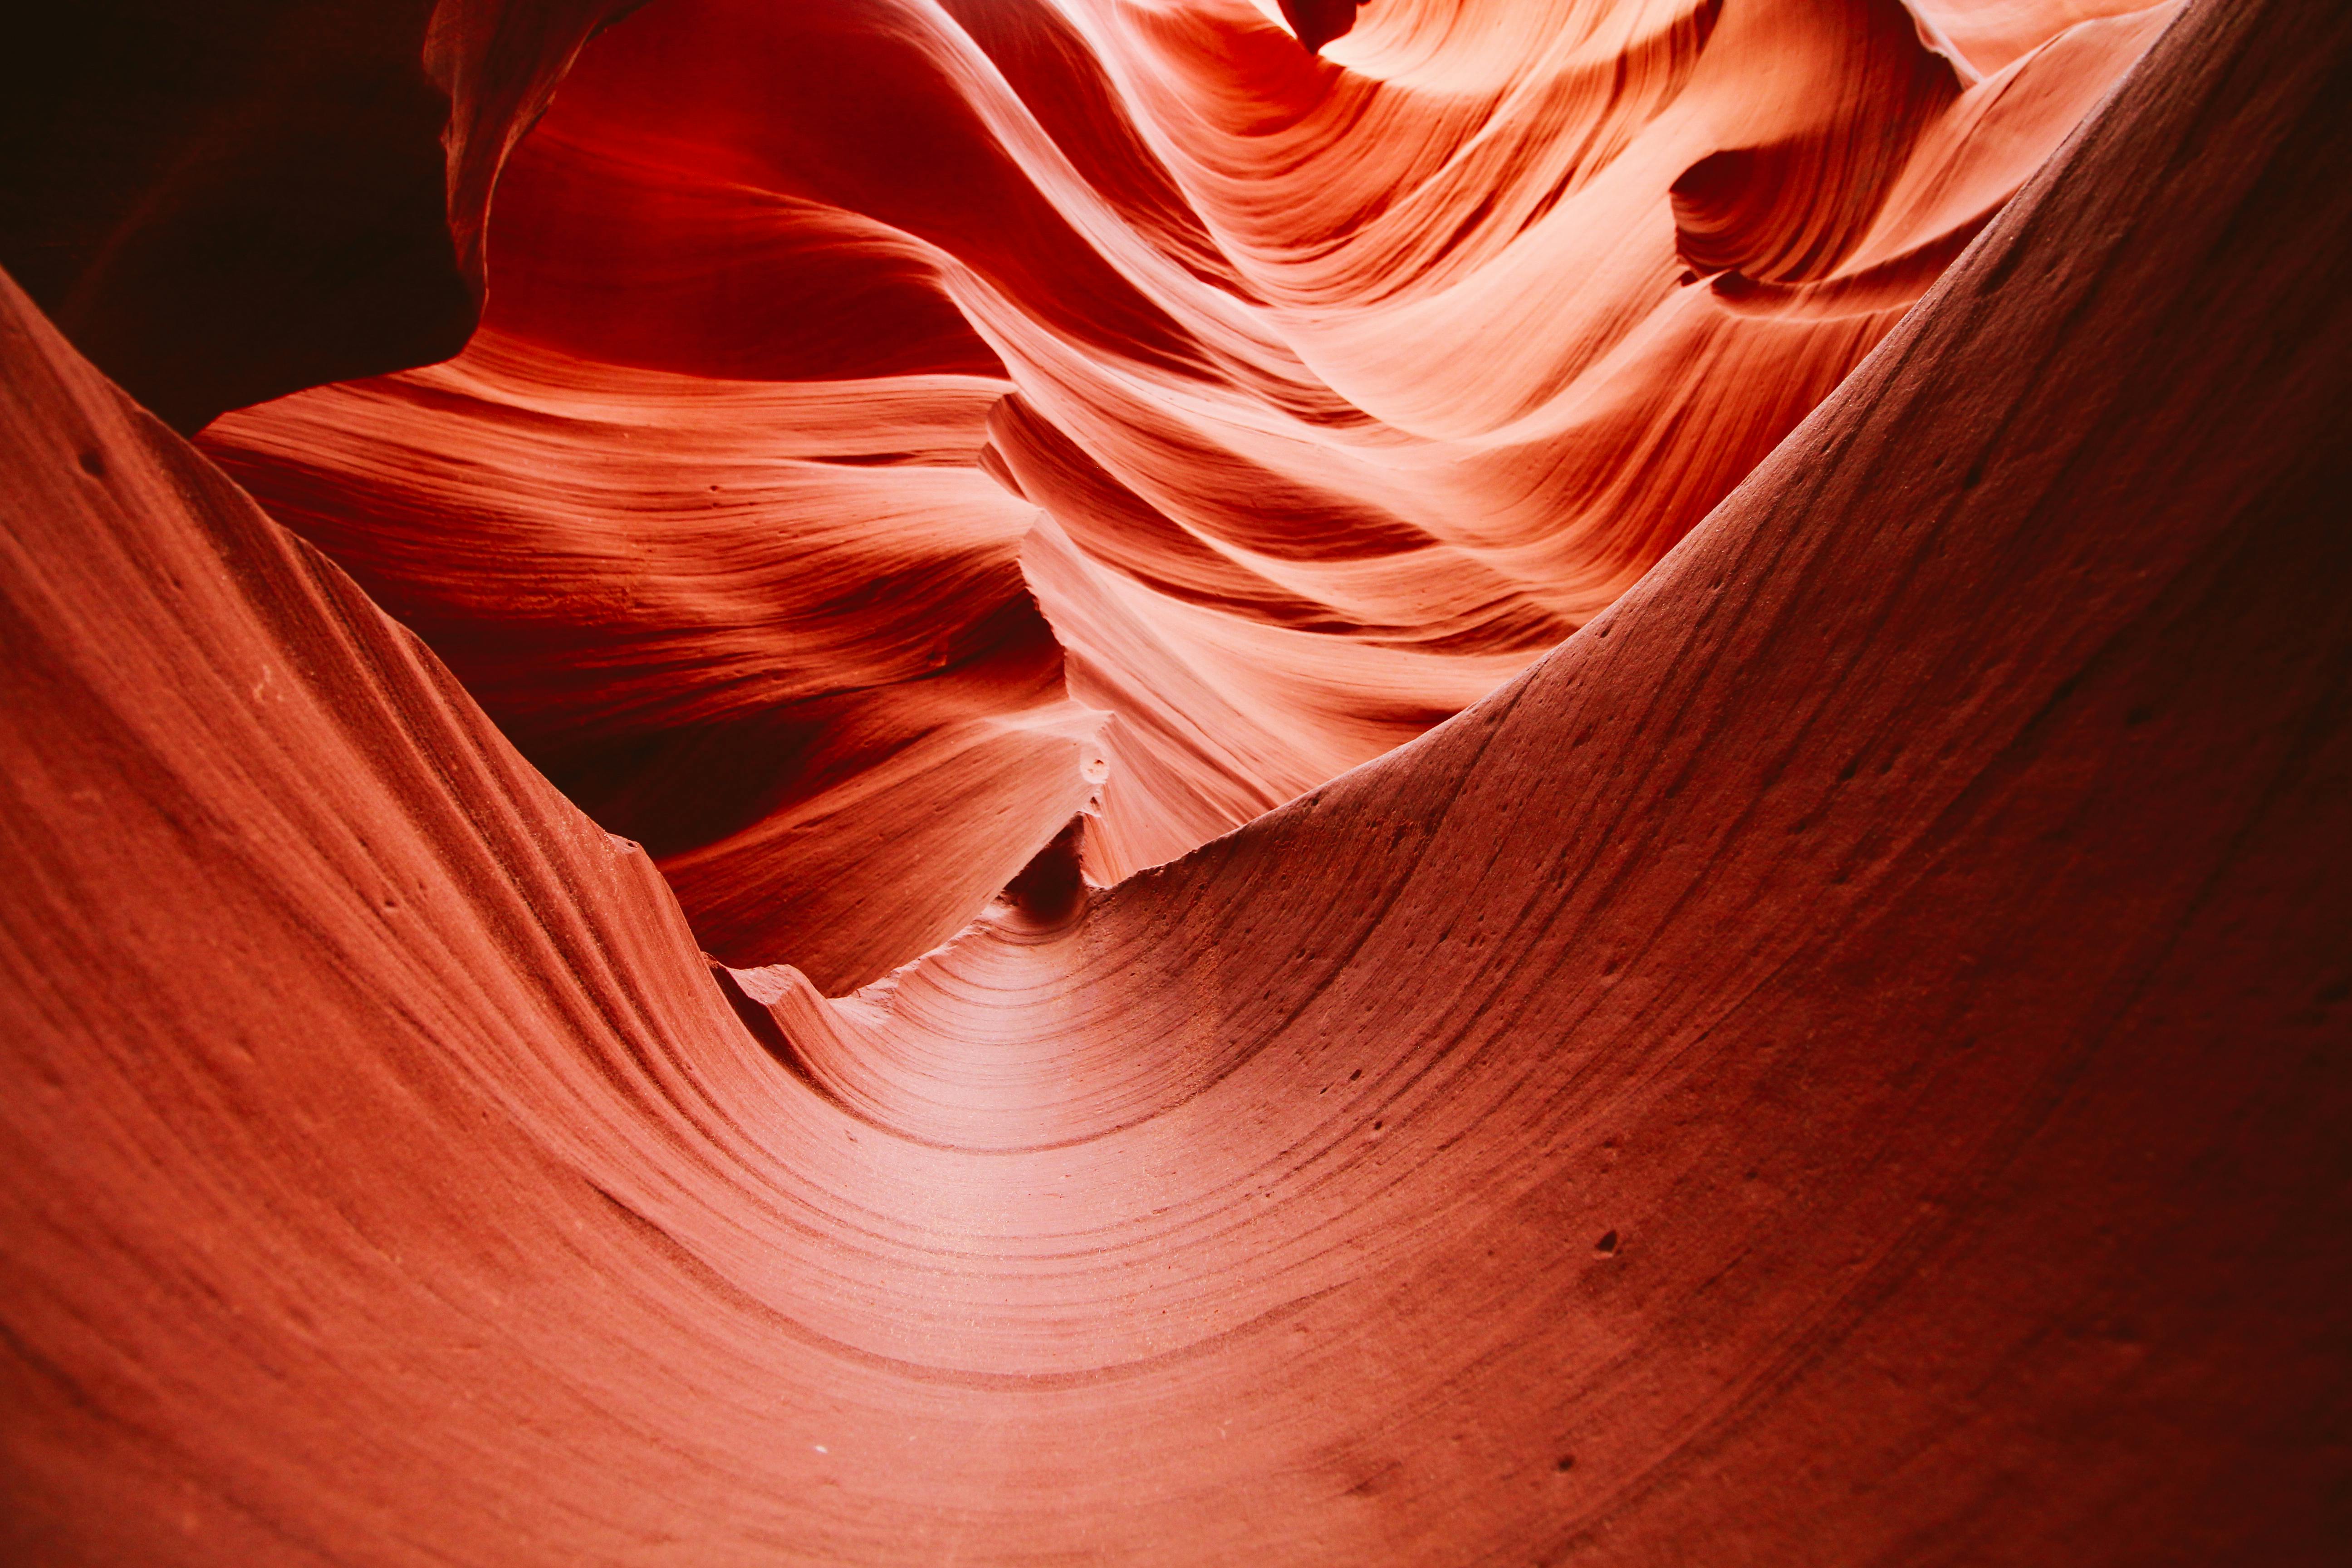 21,106 Lower Antelope Canyon Images, Stock Photos & Vectors | Shutterstock